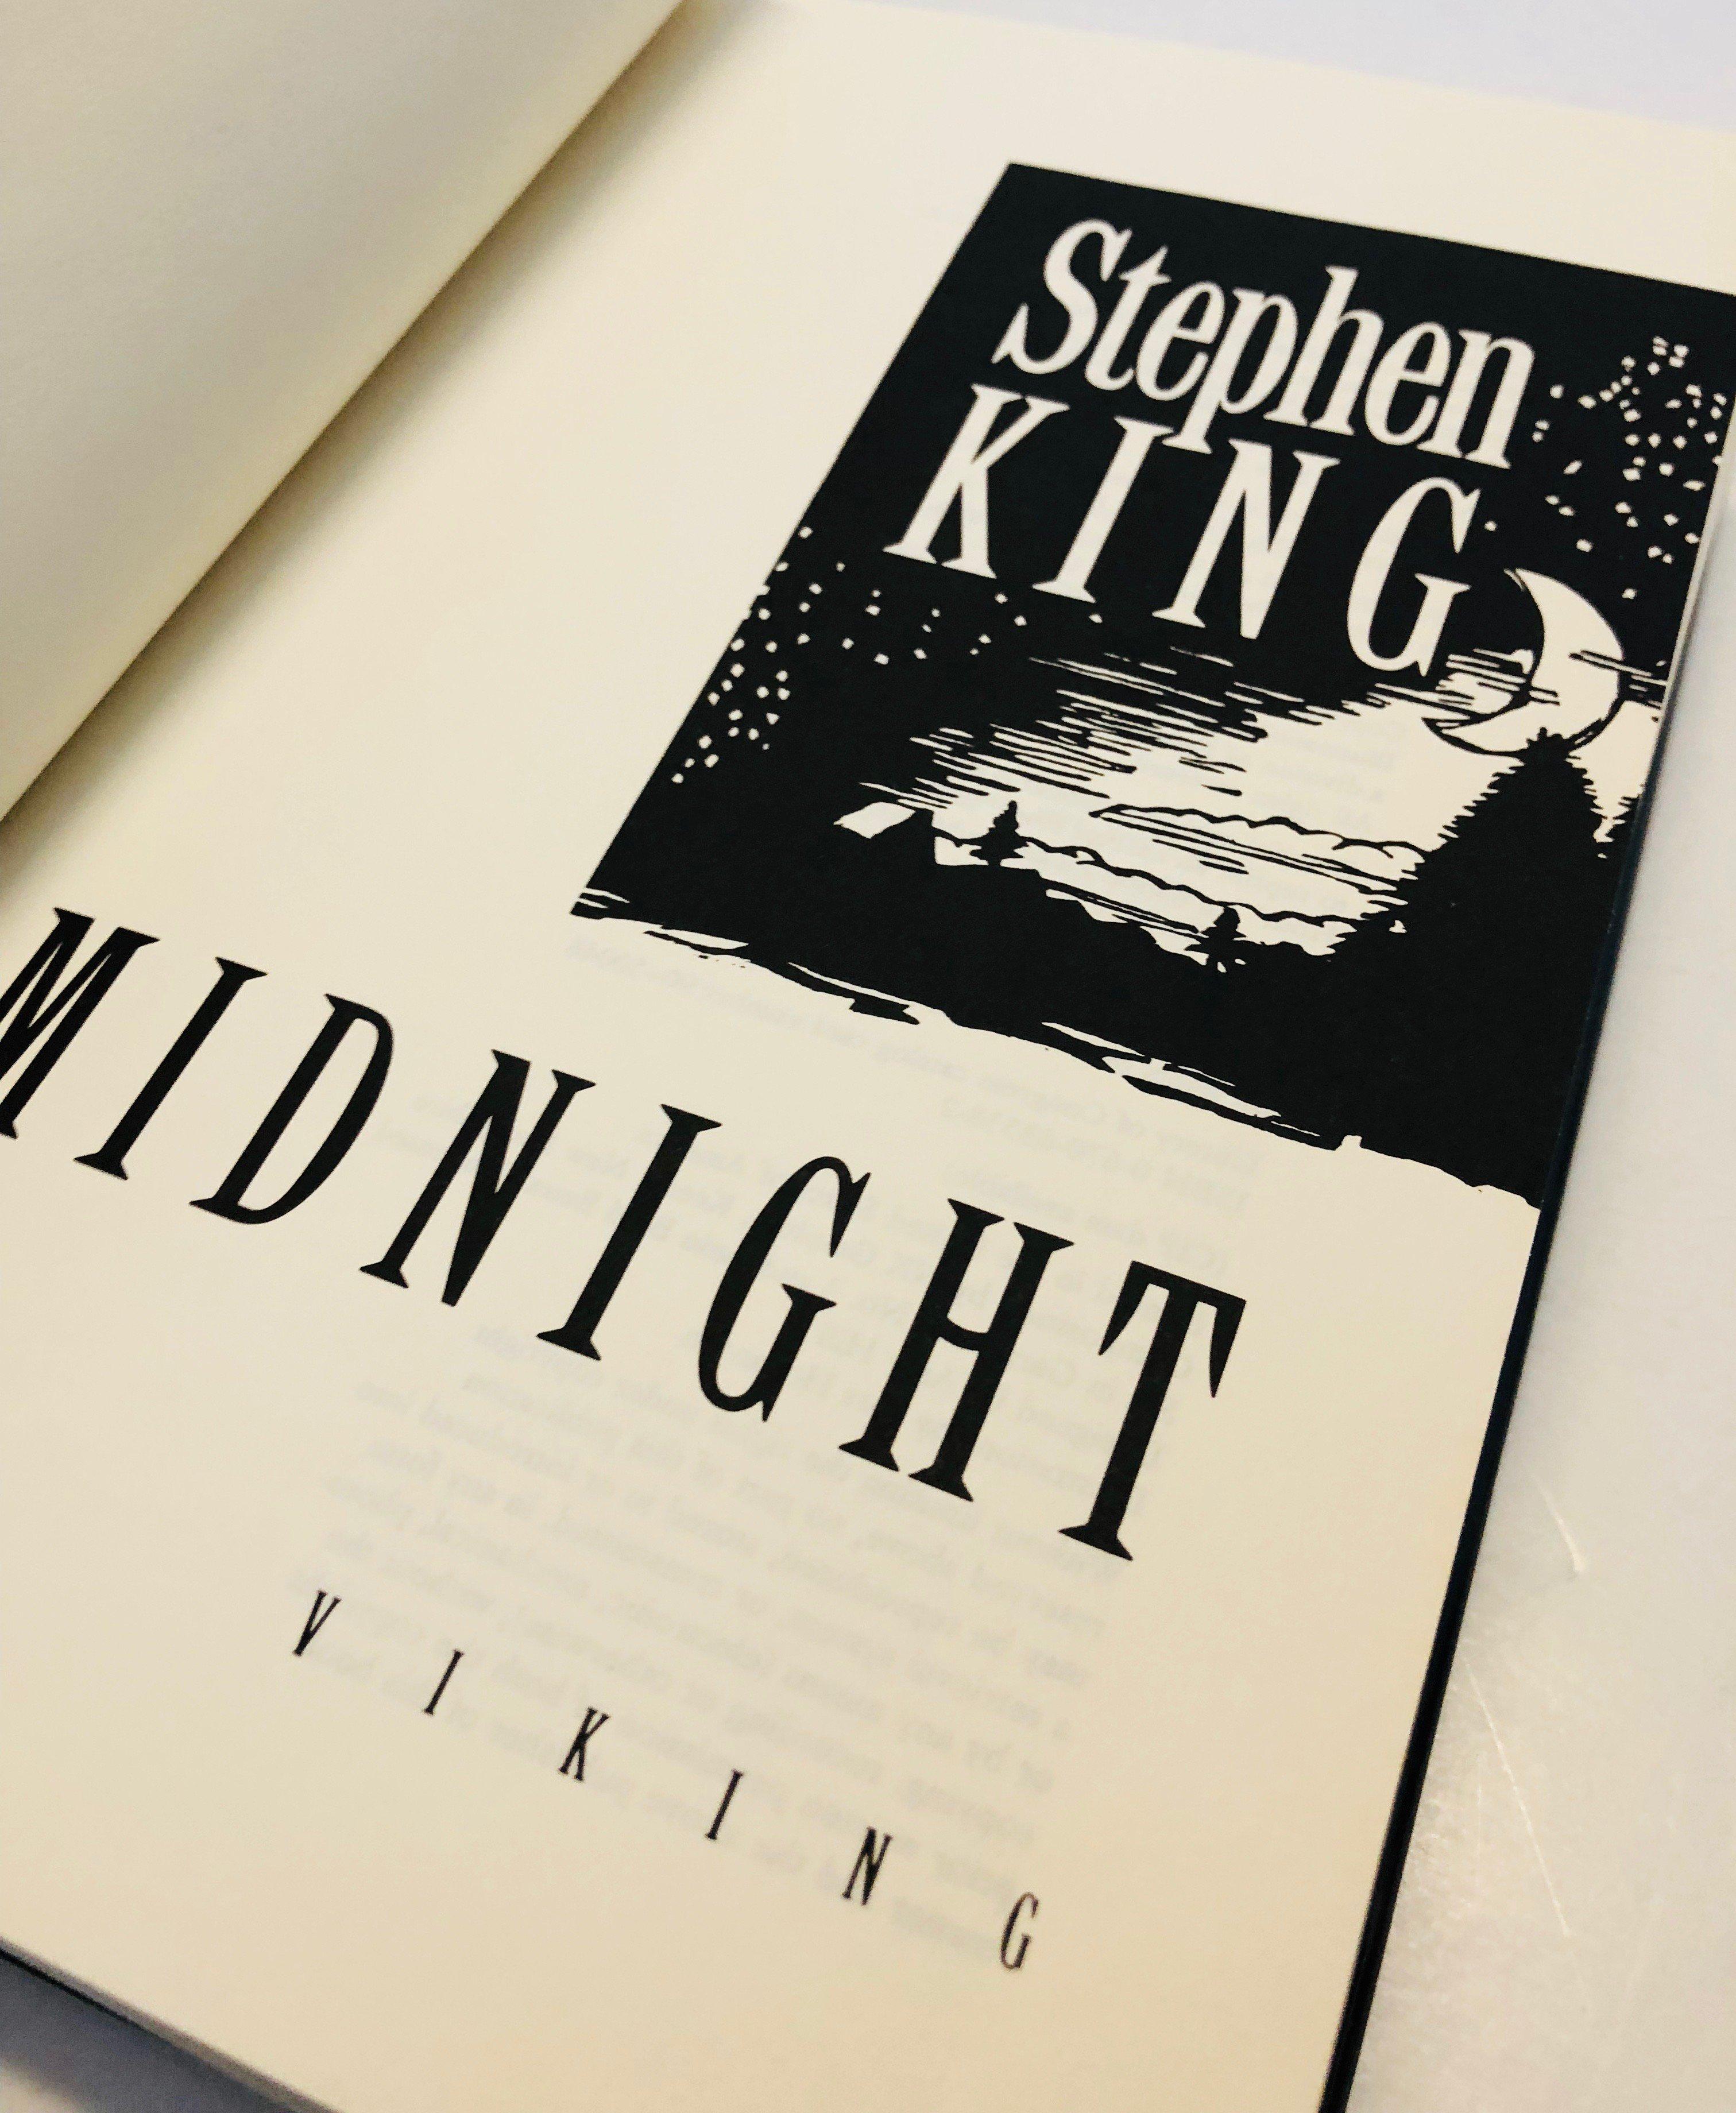 FOUR PAST MIDNIGHT by Stephen King (1990) First Edition - Printing